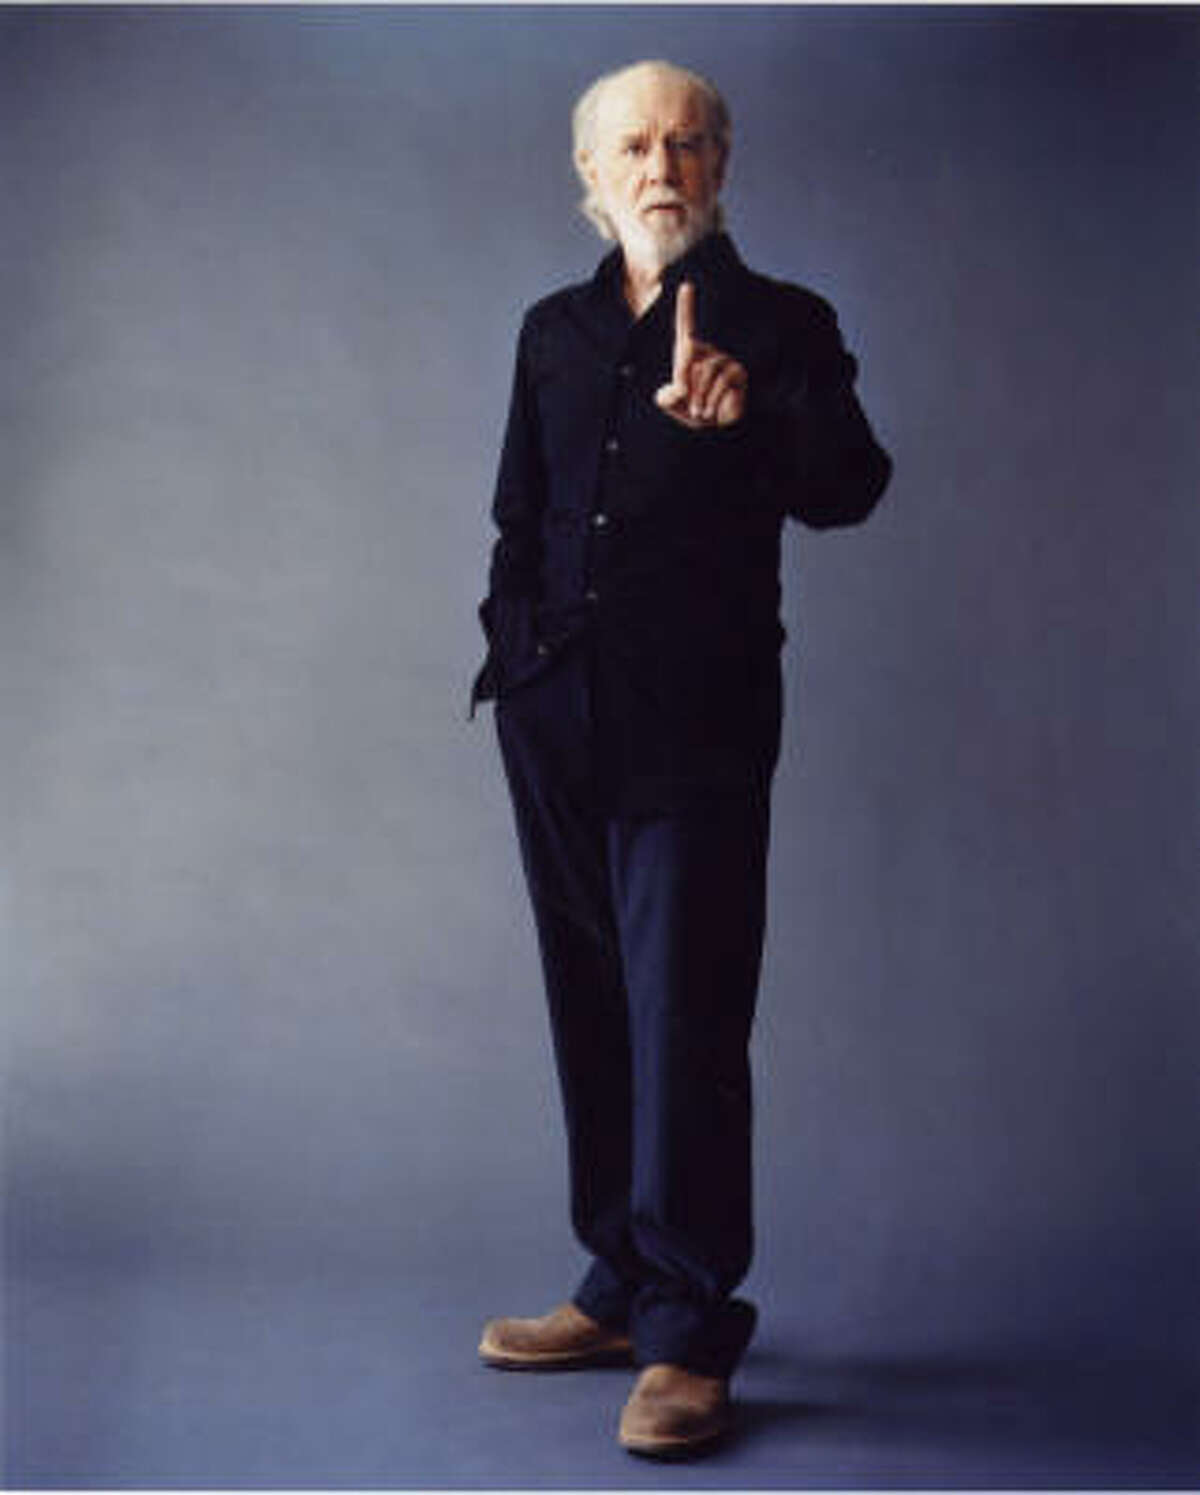 Comedian George Carlin died Sunday at 71.